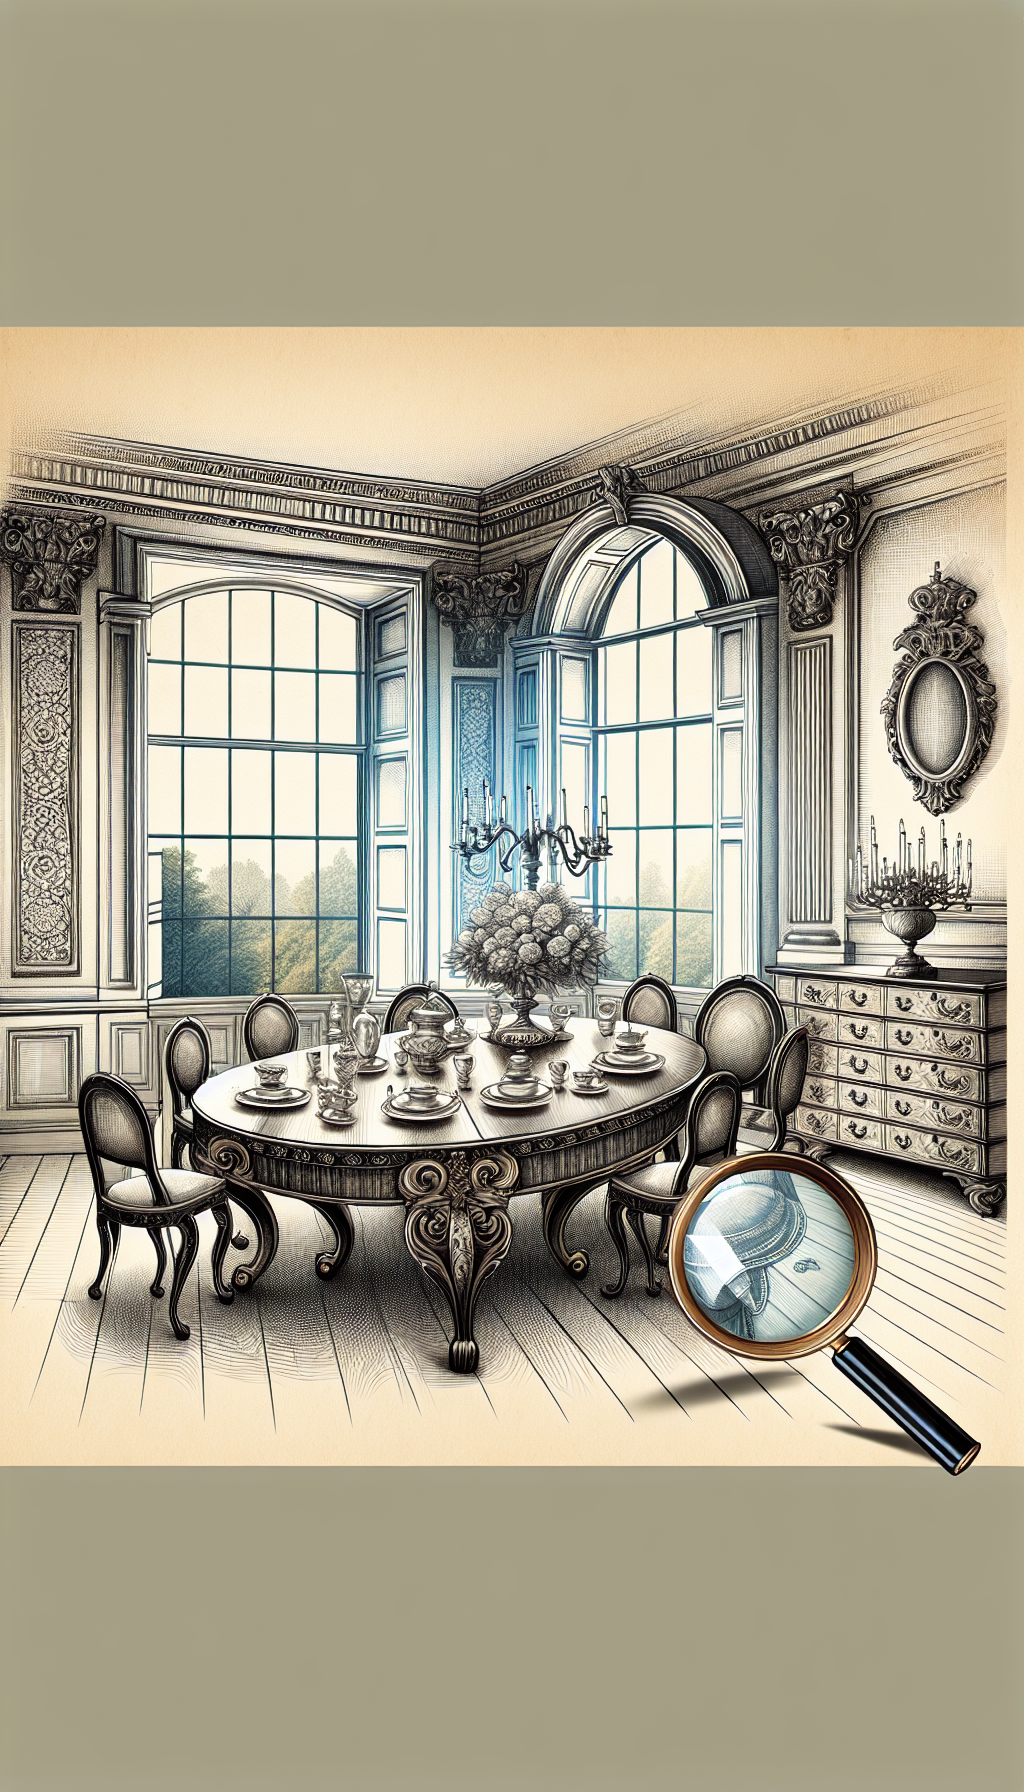 An illustration of an ornate Georgian dining room, its walls adorned with intricate moldings and a large, sash window revealing a classical landscape. Central to this is an exquisite antique dining table with claw-foot detailing, set with period silverware and porcelain. A magnifying glass hovers above, highlighting the table's unique features, symbolizing the identification of its 18th-century elegance and style.